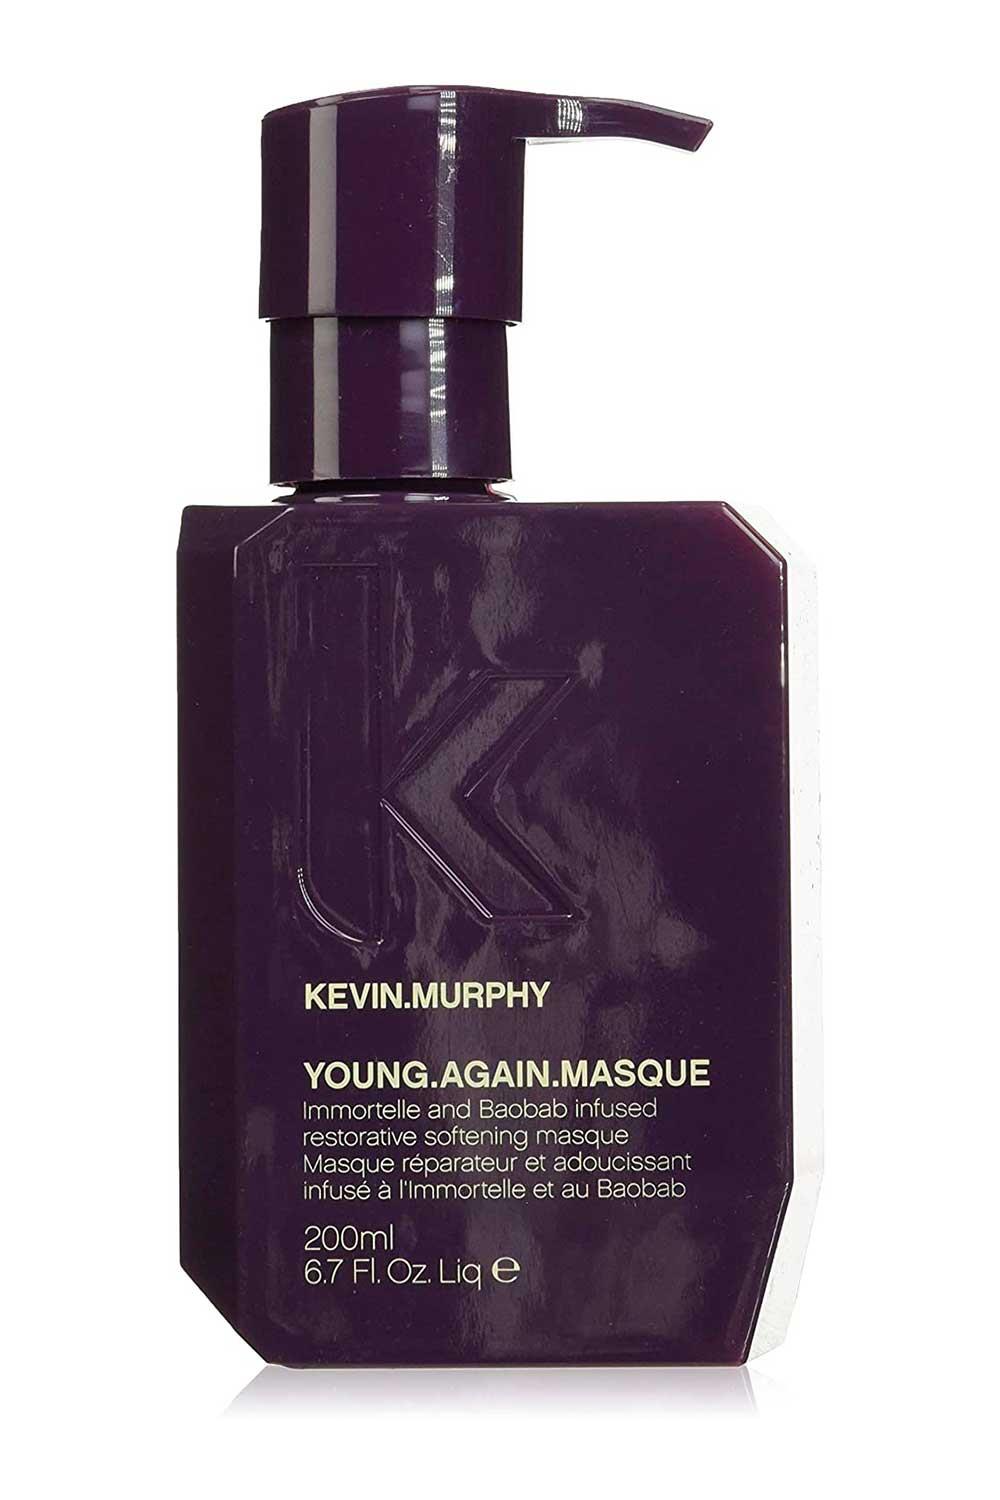 KkevinnM. Young.Again.Masque, Kevin Murphy